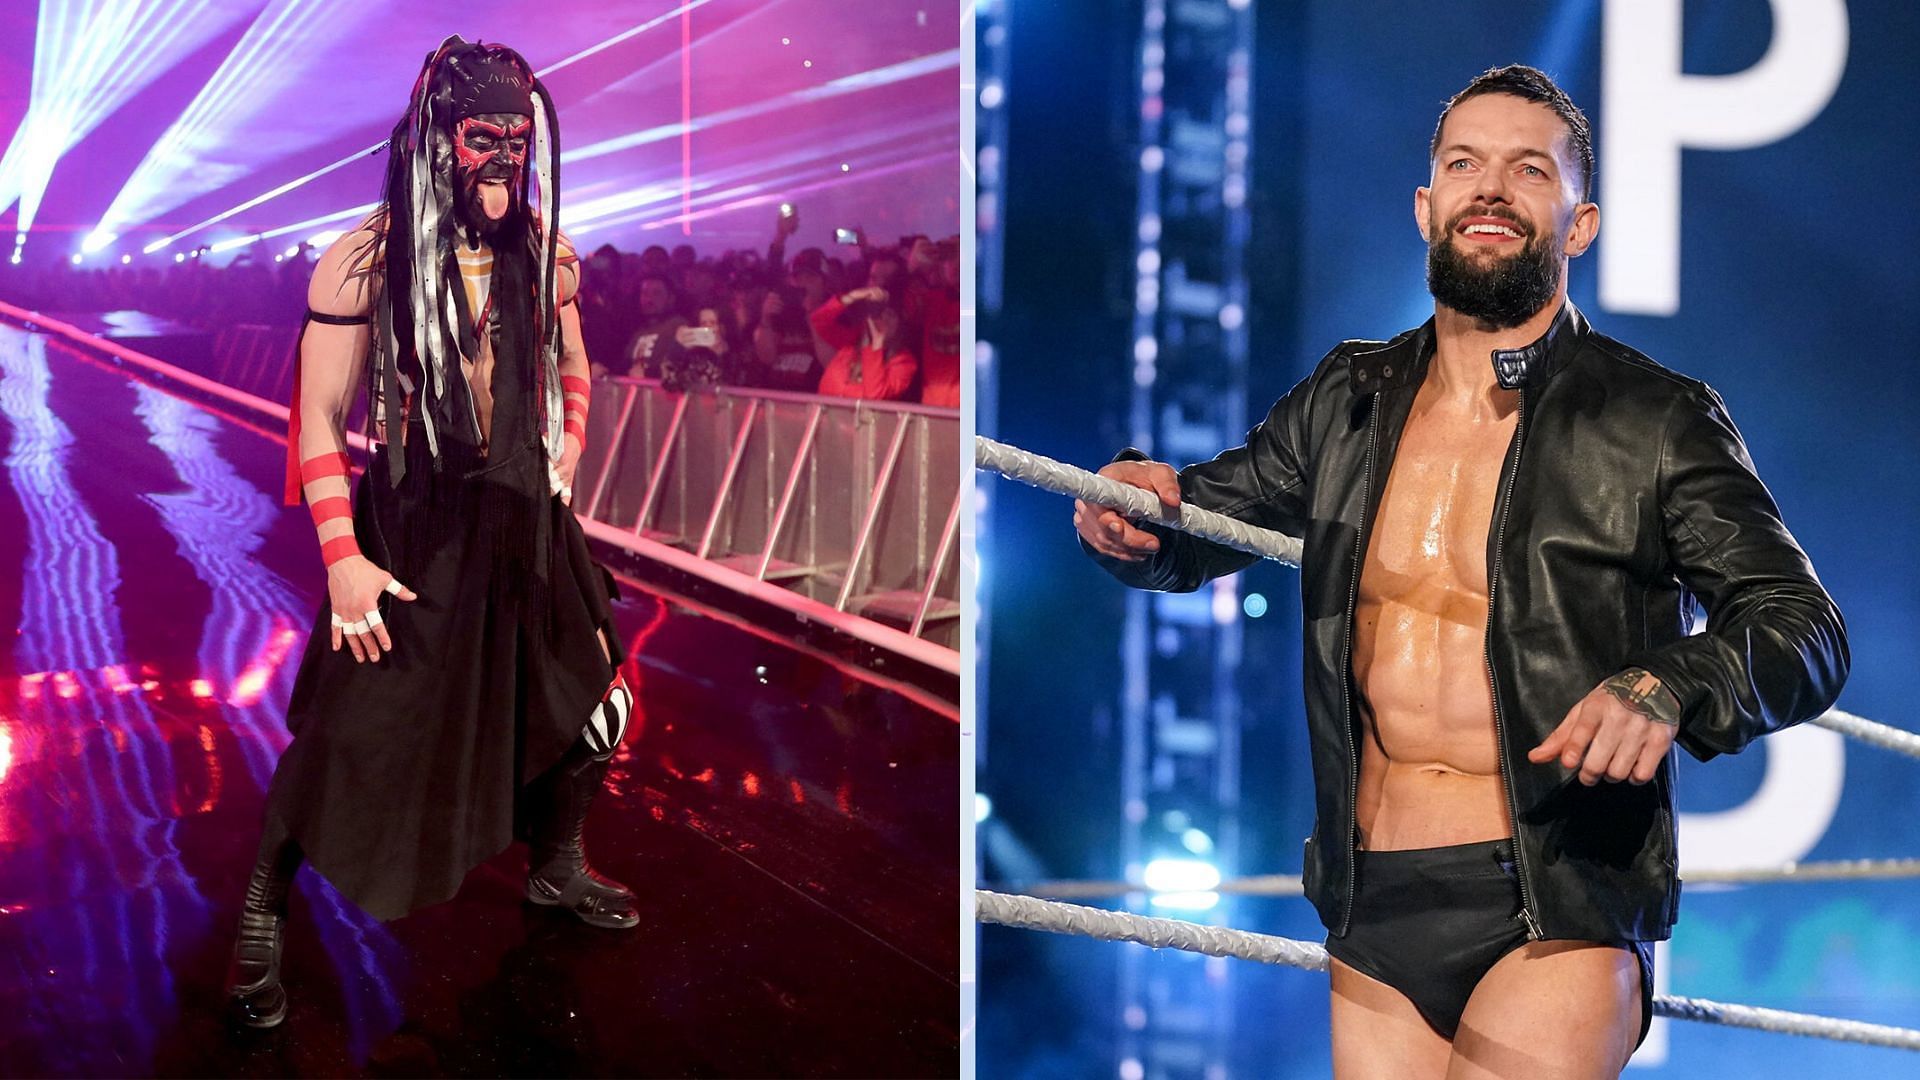 Could The Demon persona return for WWE WrestleMania Hollywood?